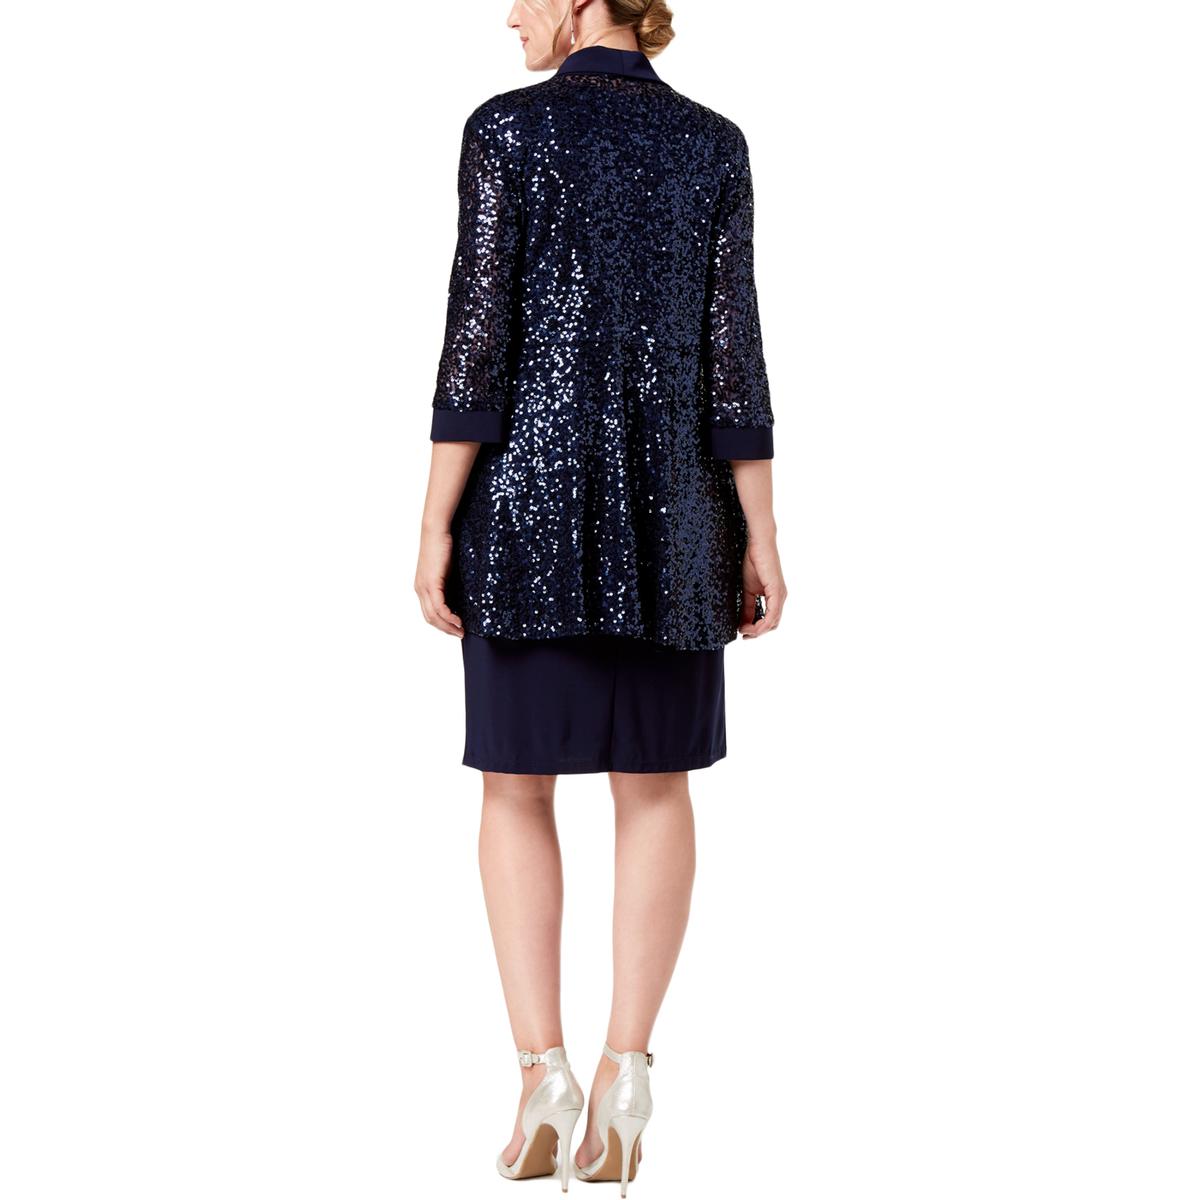 R&M Richards Womens Navy Metallic Sequined 2PC Dress With Jacket 8 BHFO